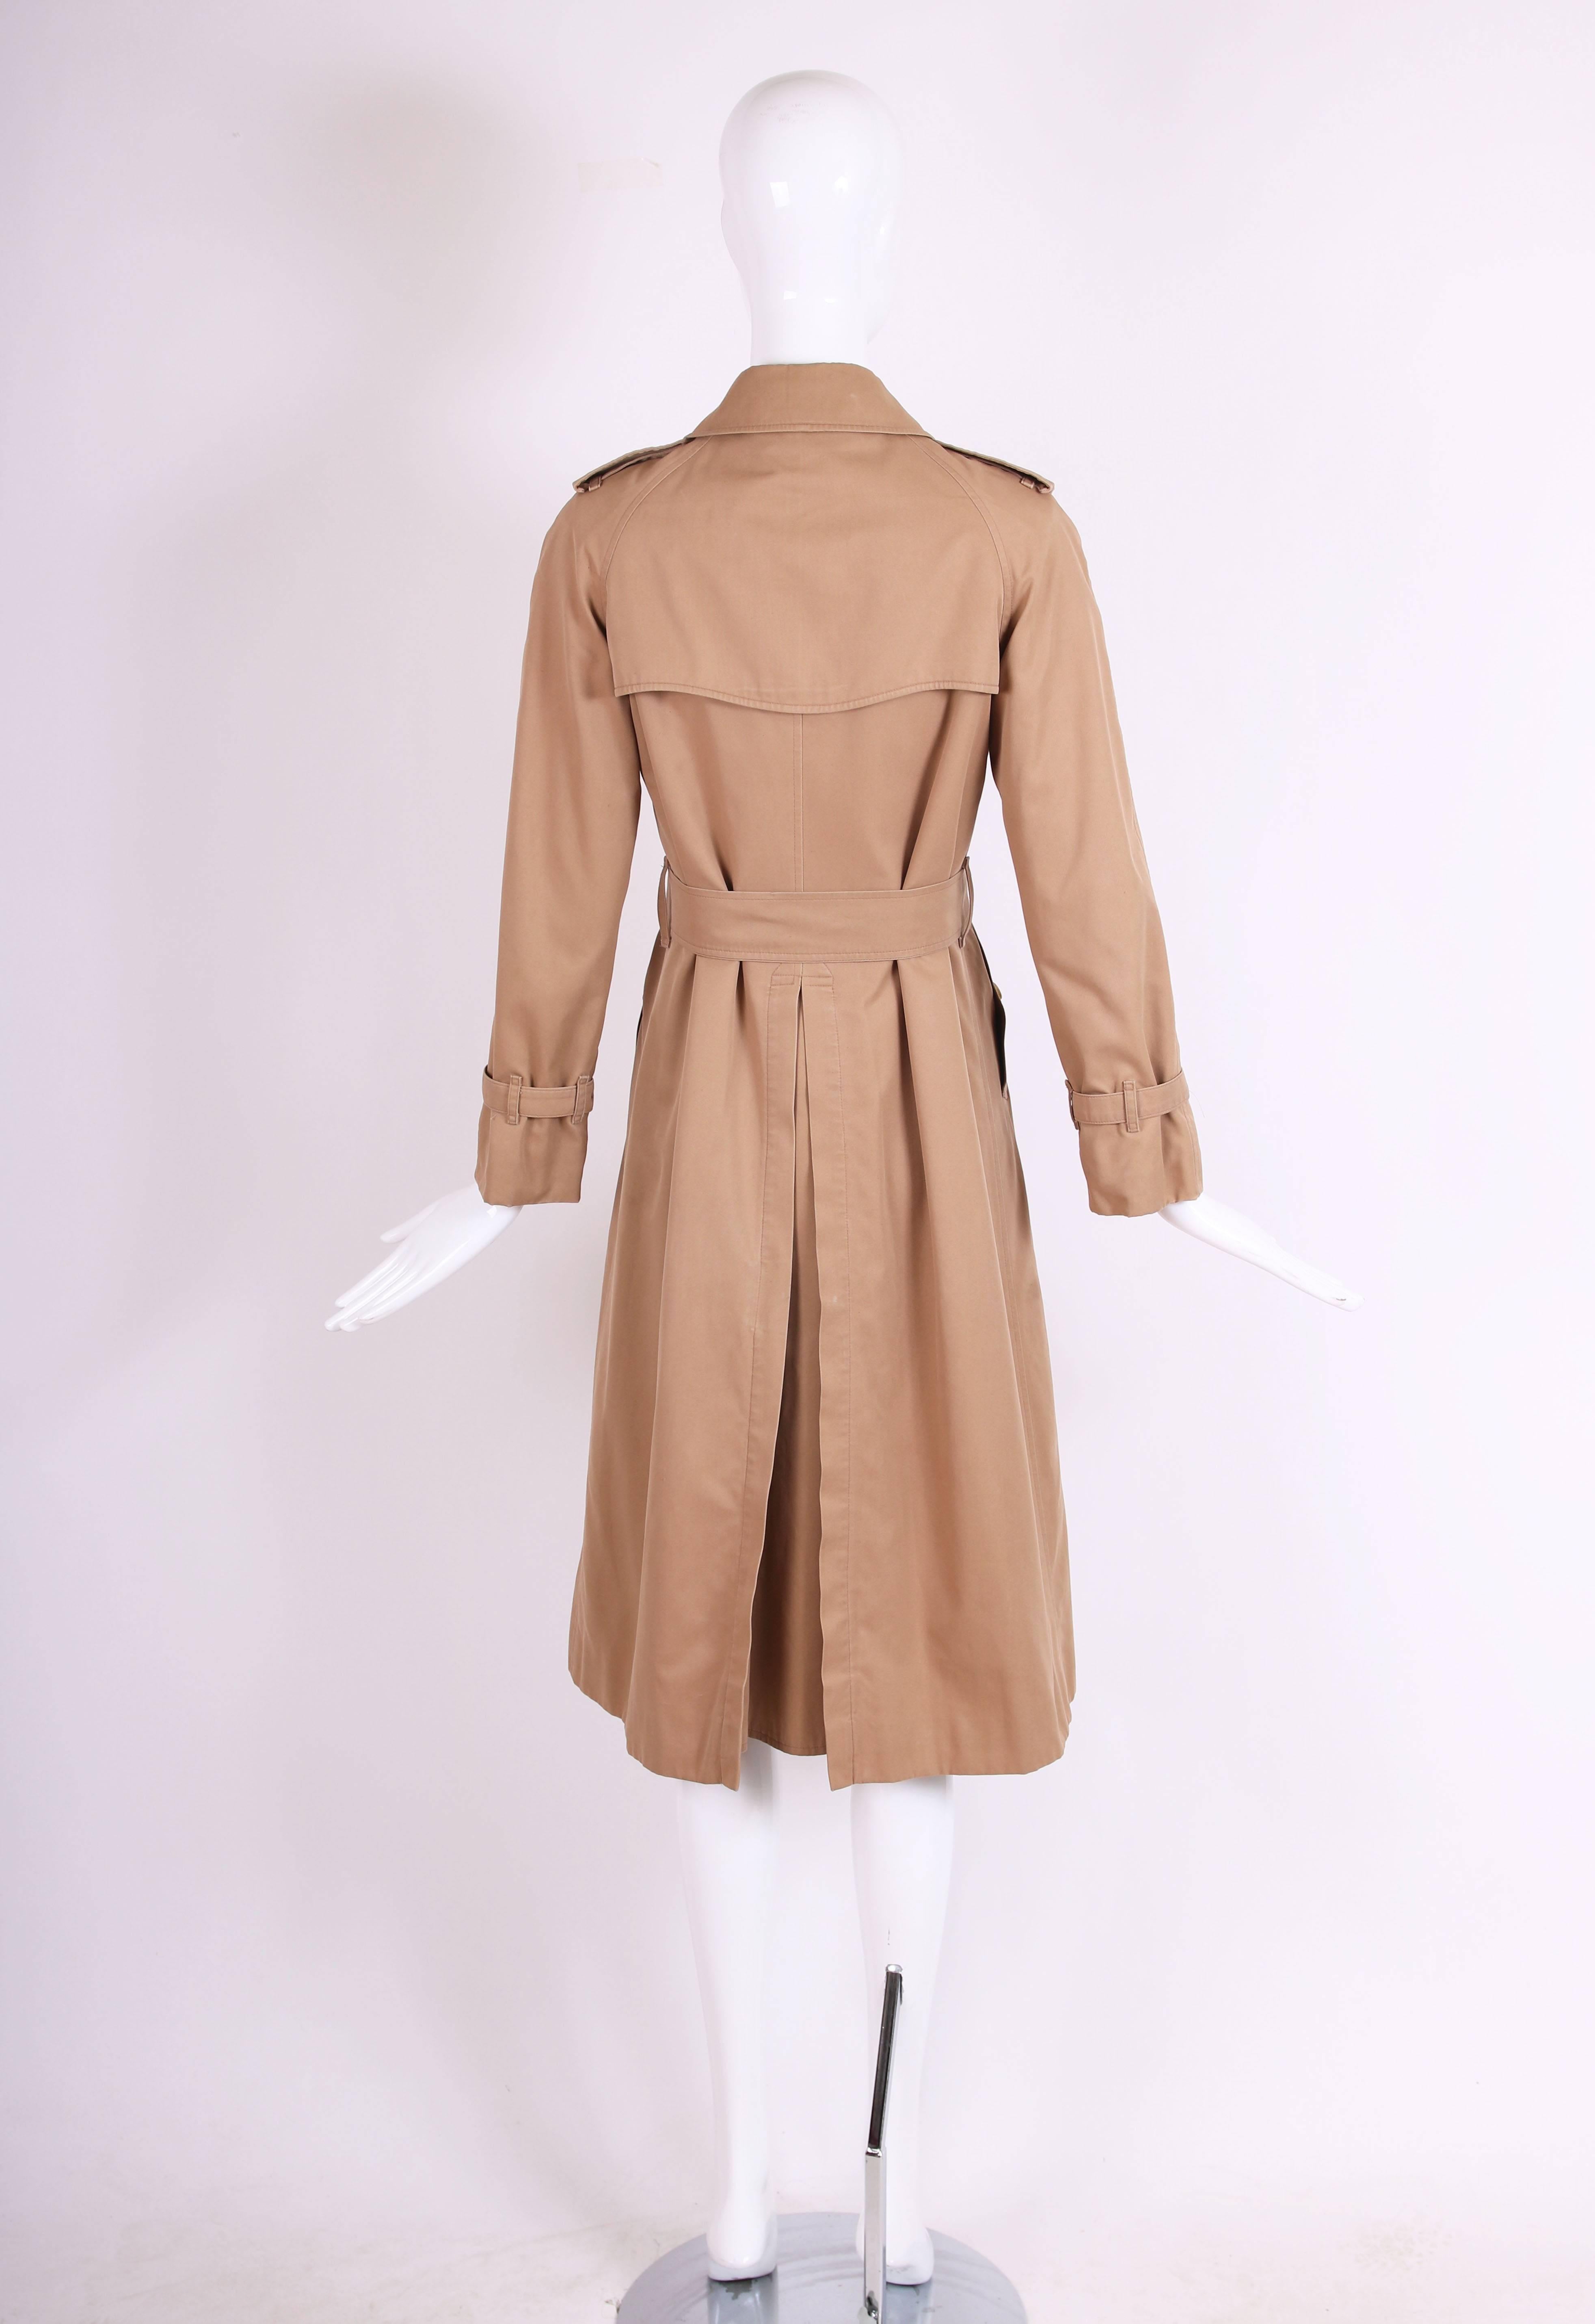 Beige Burberry Trench Coat in Camel with Plaid Interior Lining